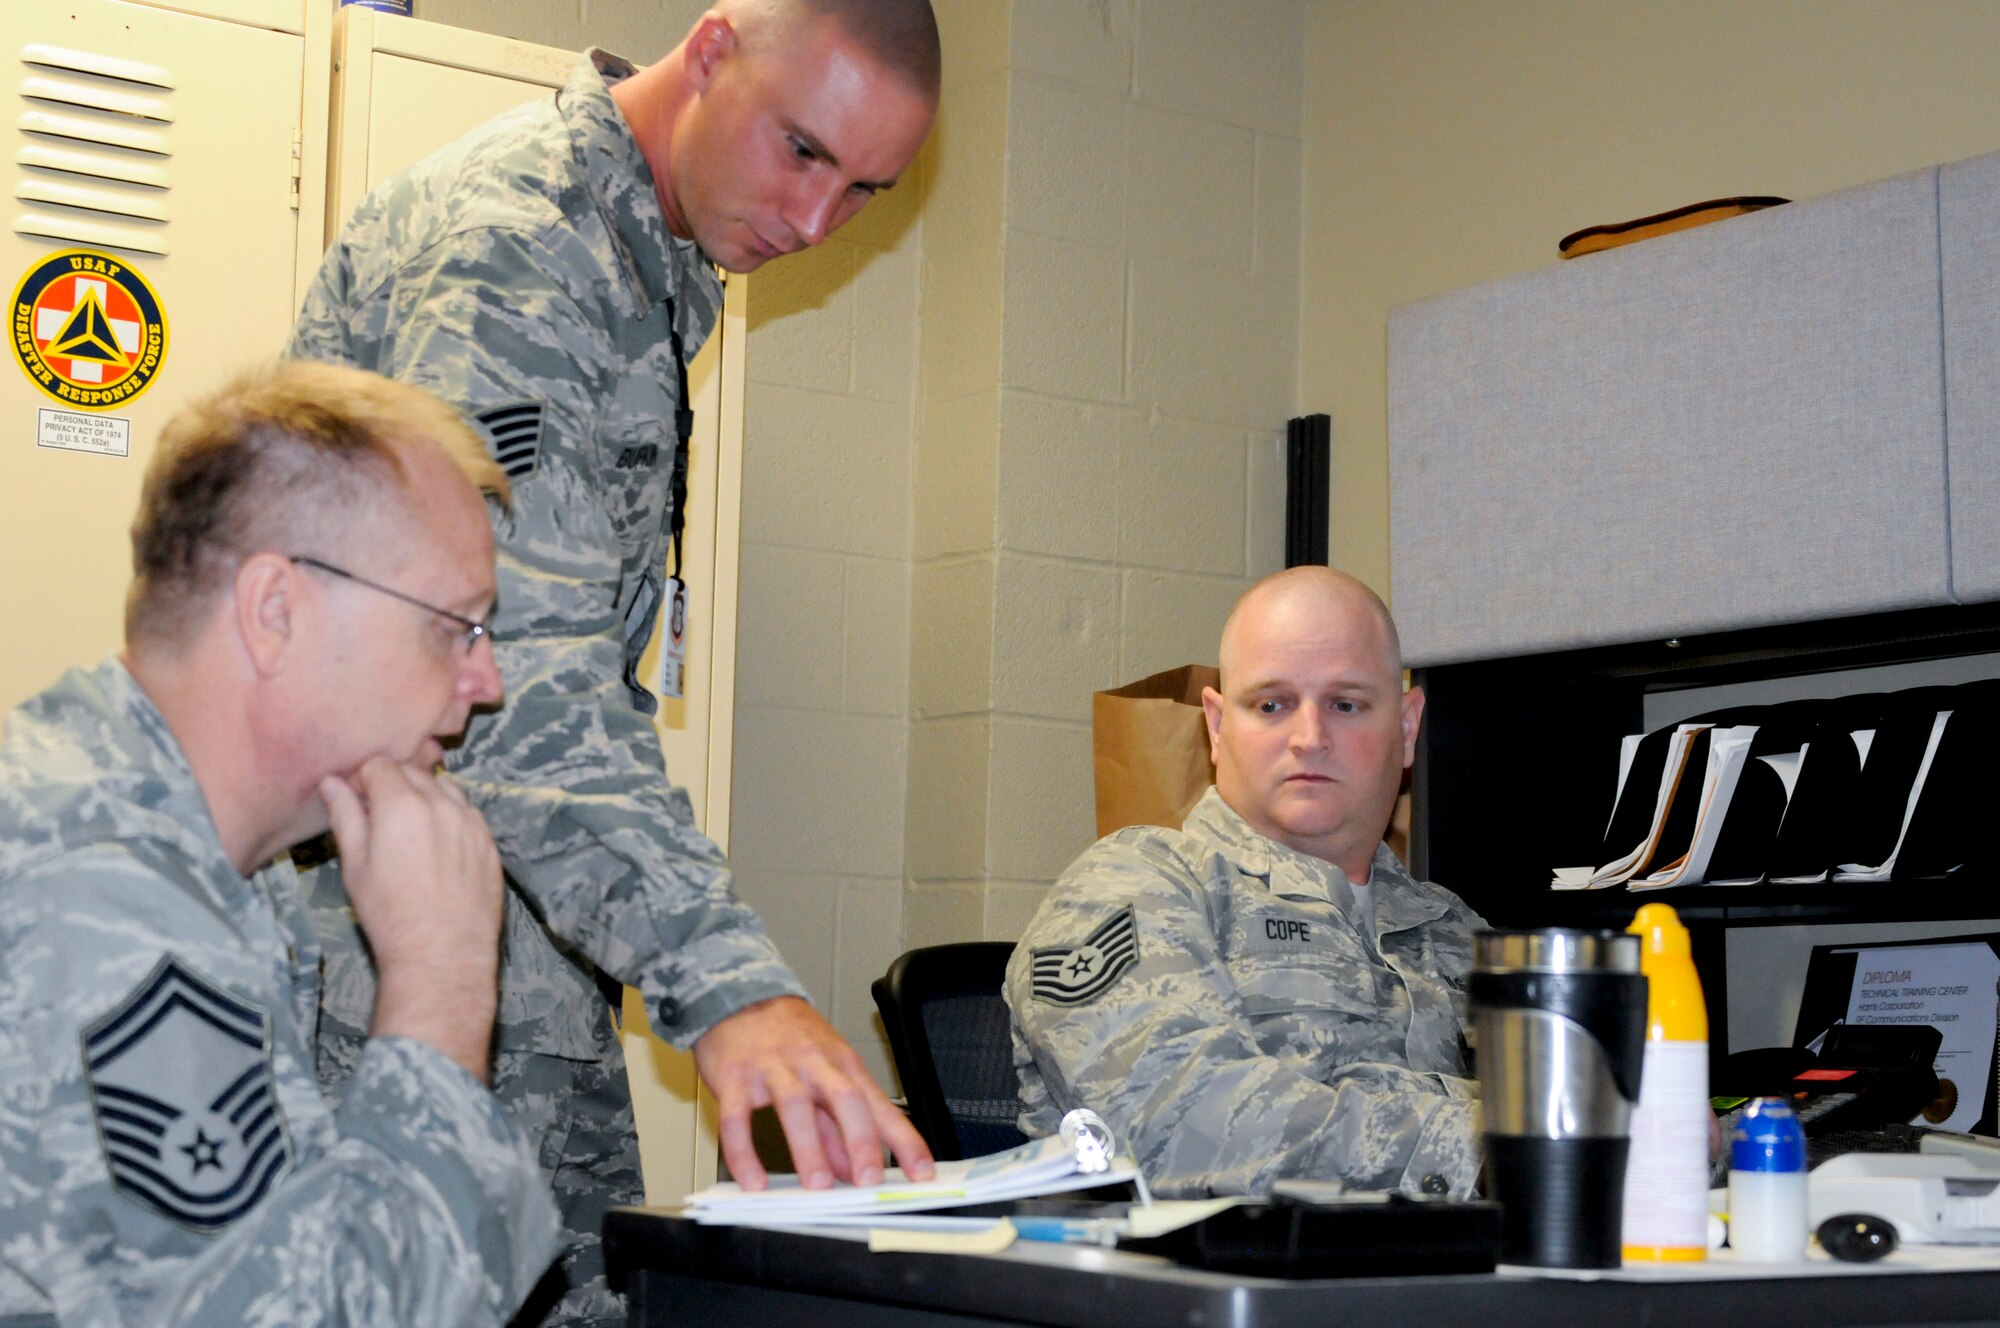 Tech. Sgt. Terry Bufkin (center), command security forces inspector stationed at Joint Base Langley-Eustis, Va., goes over self-inspection checklist items with Senior Master Sgt. Edgar Mahan and Tech Sgt. Joseph Cole, both assigned to the 188th Security Forces Squadron. The ACC IG inspectors spent two days visiting Security Forces and Civil Engineer Squadrons and working with Wing Inspection Team members on the proper techniques and procedures for conducting program inspections. (U.S. Air Force photo by Capt. Holli Nelson)